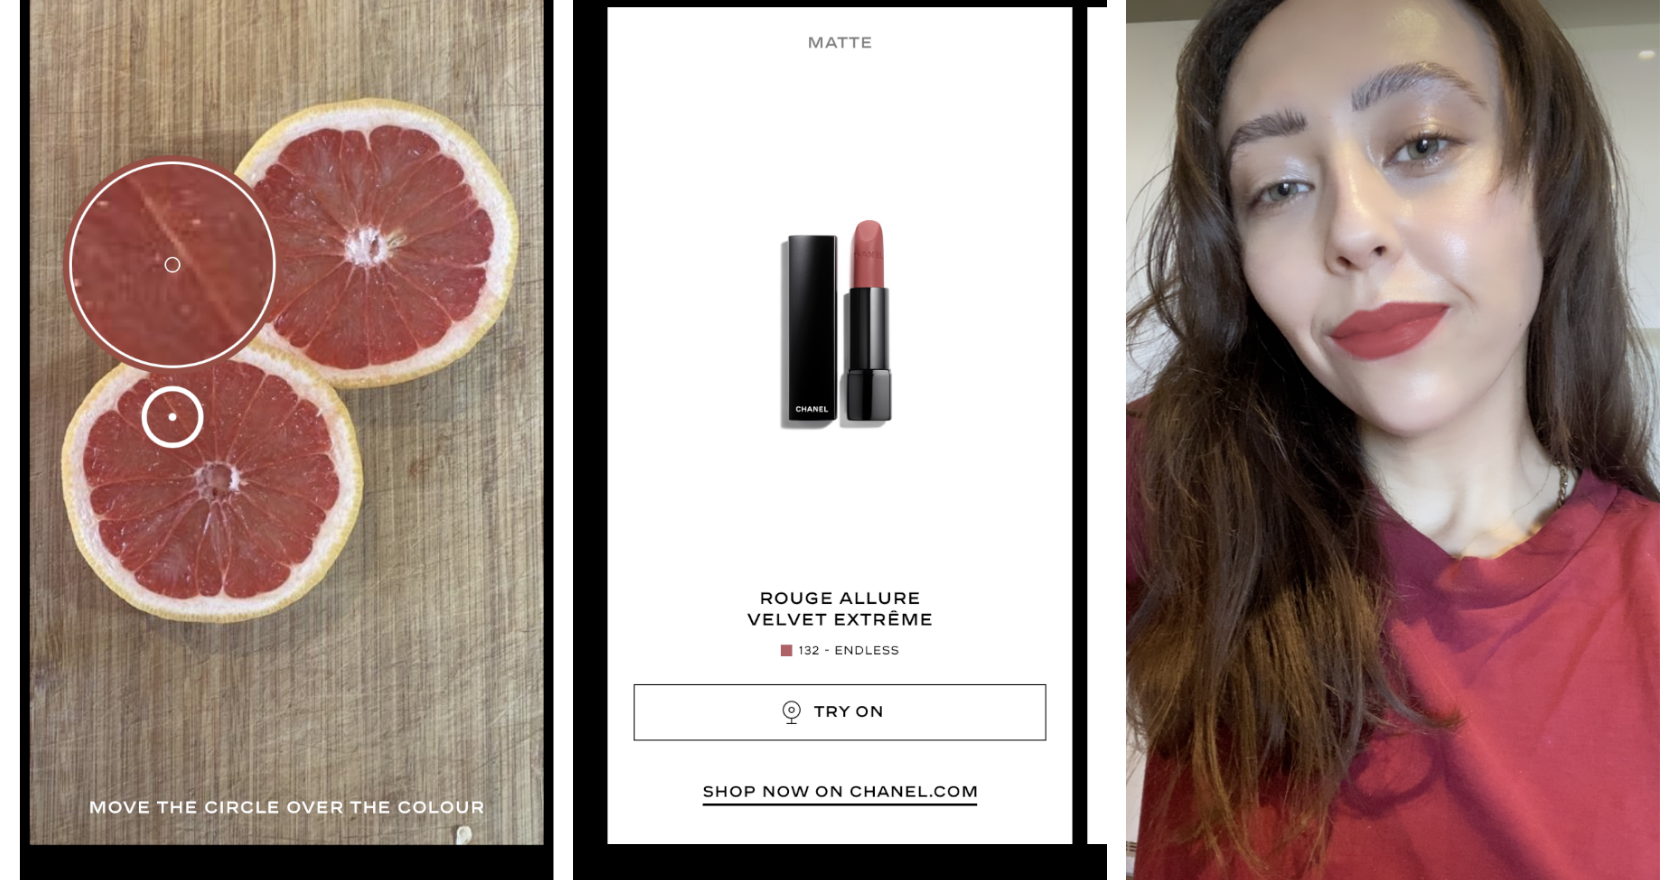 Chanel's brilliant new app will find the perfect lipstick shade for you